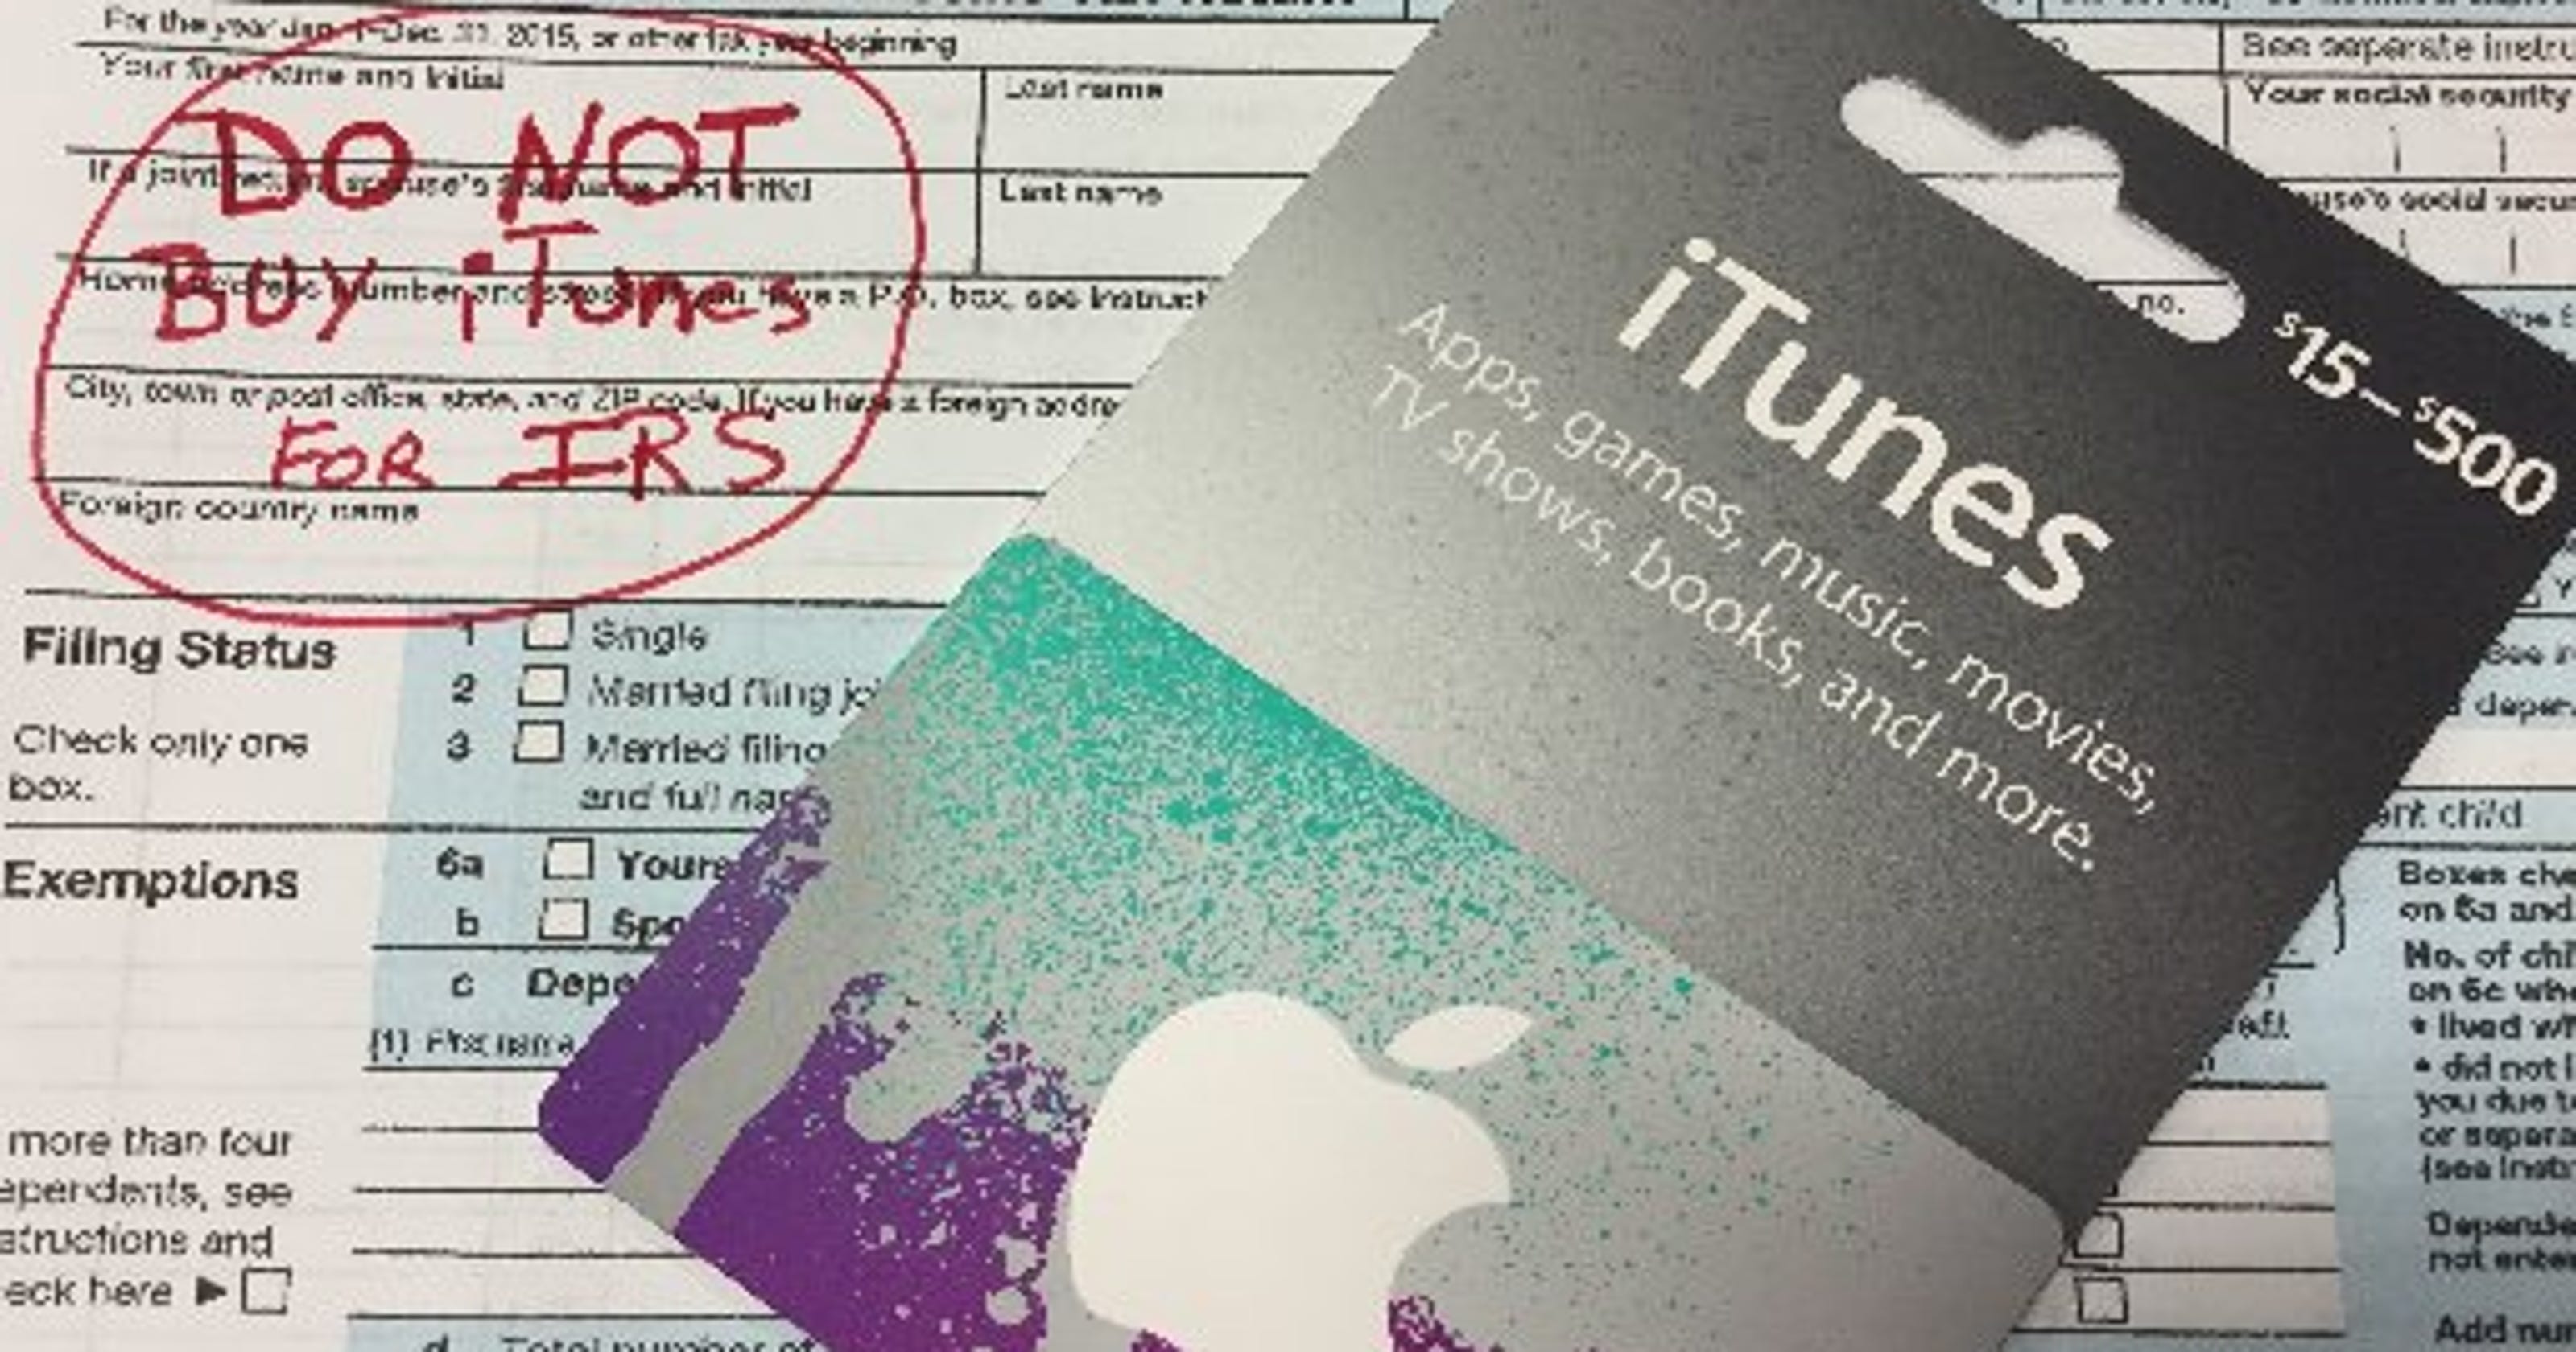 Don't let scammers snow you with iTunes or other gift cards